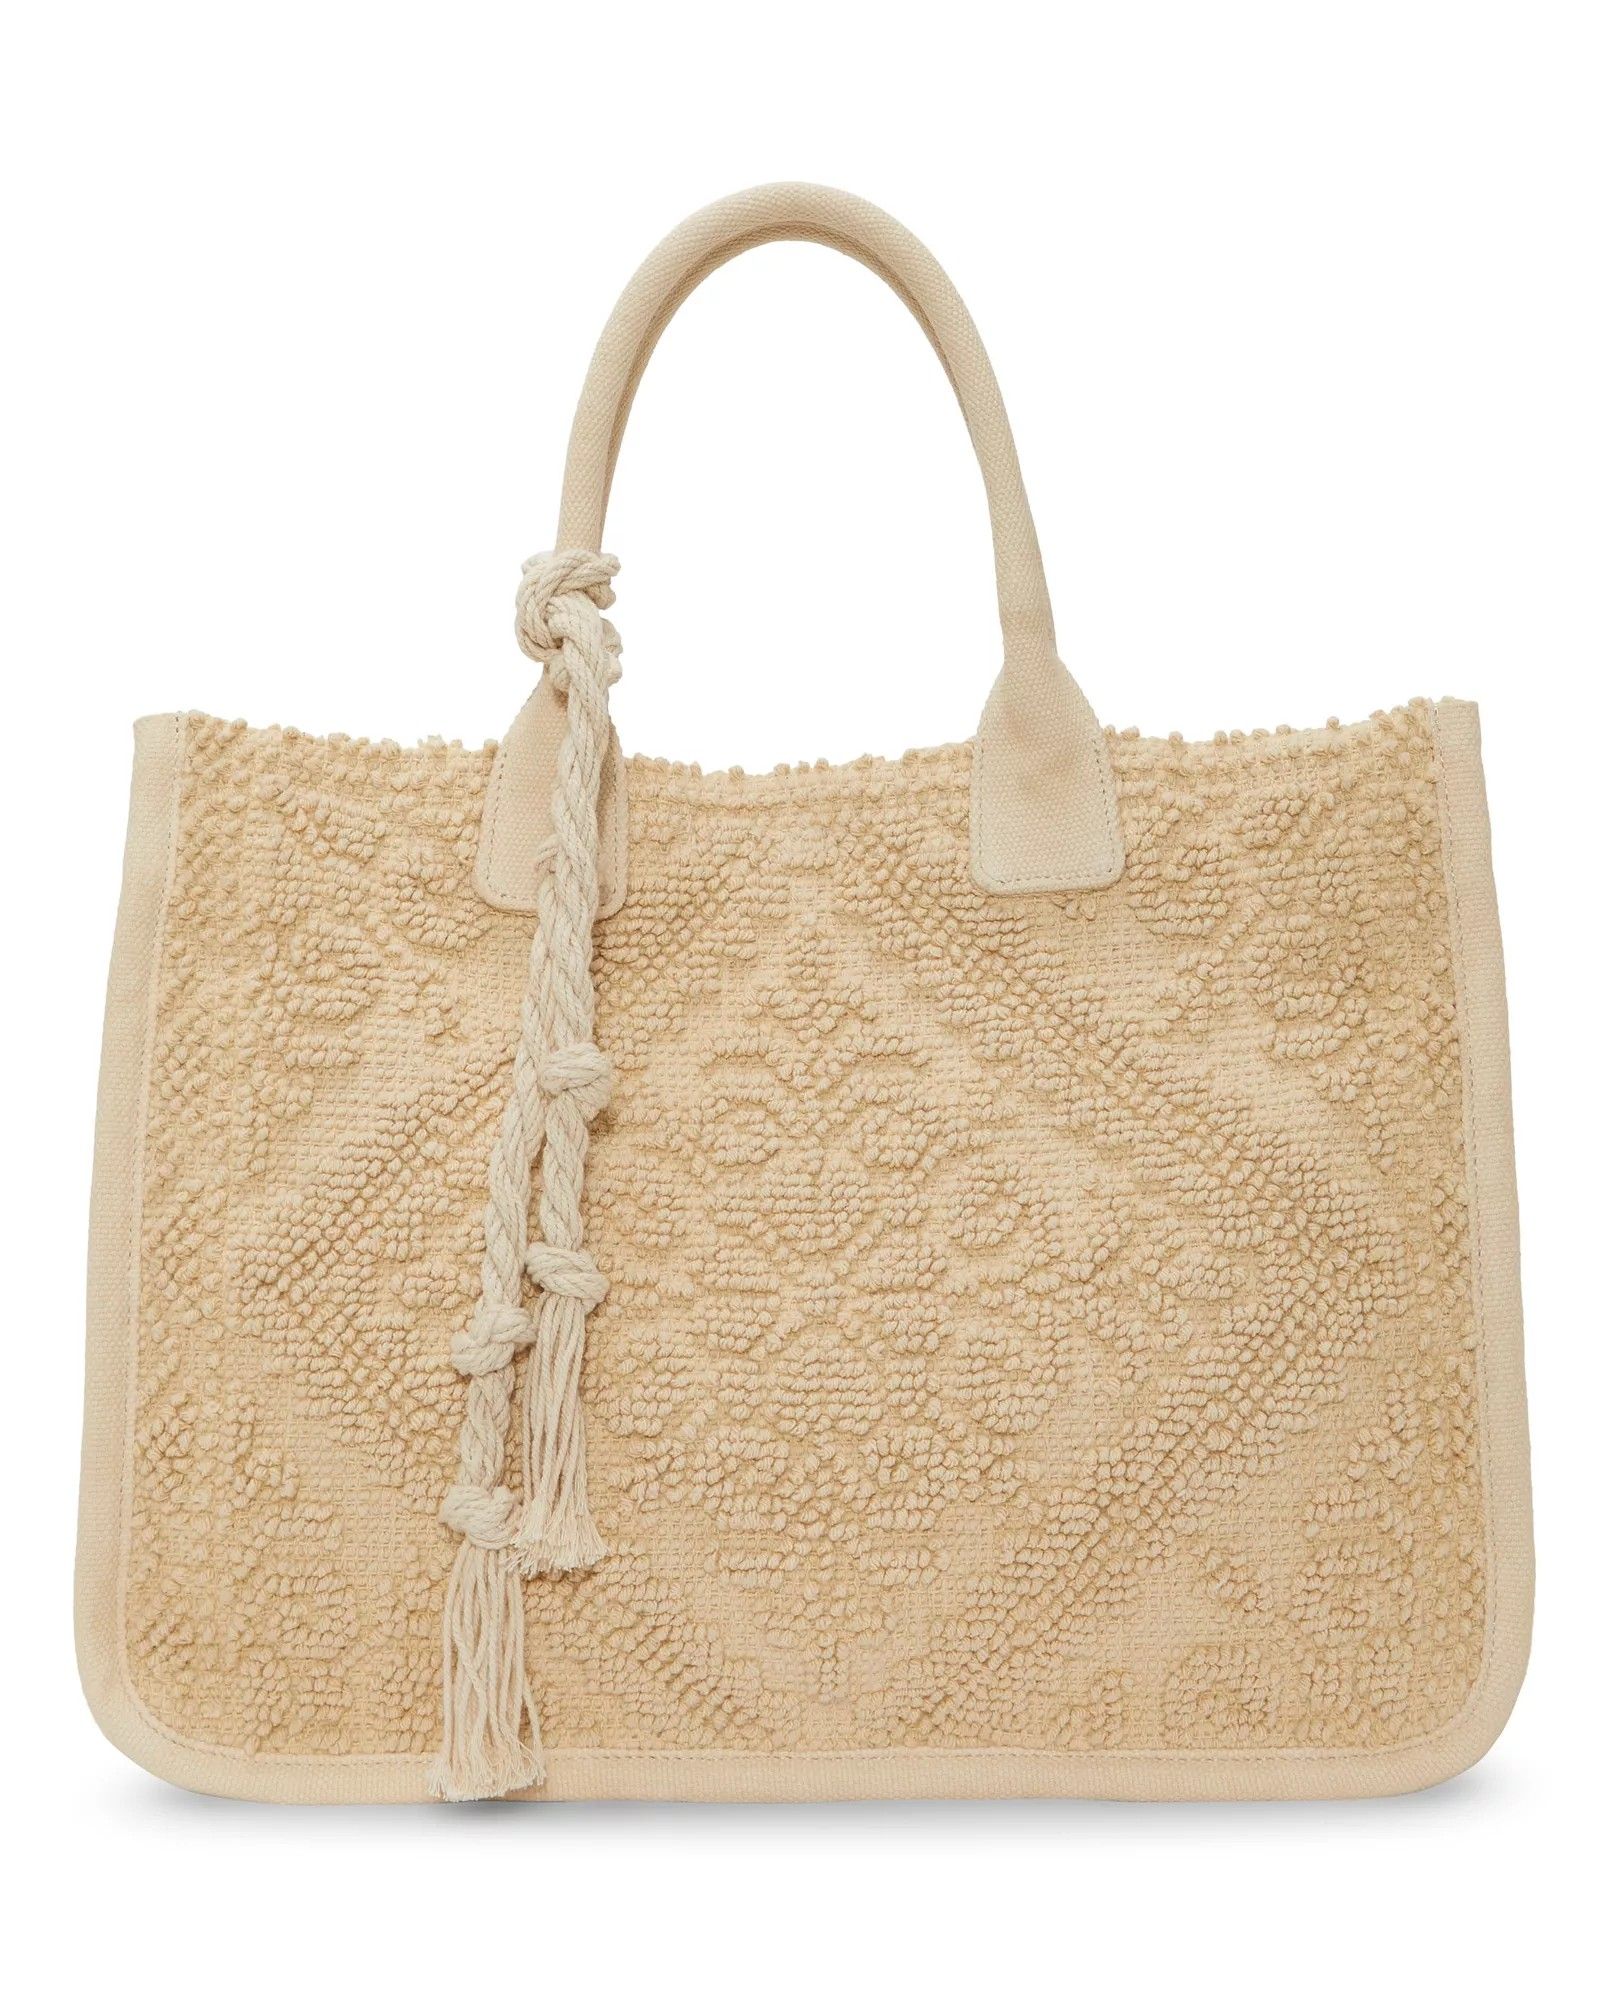 Vince Camuto Orla Tote | Vince Camuto